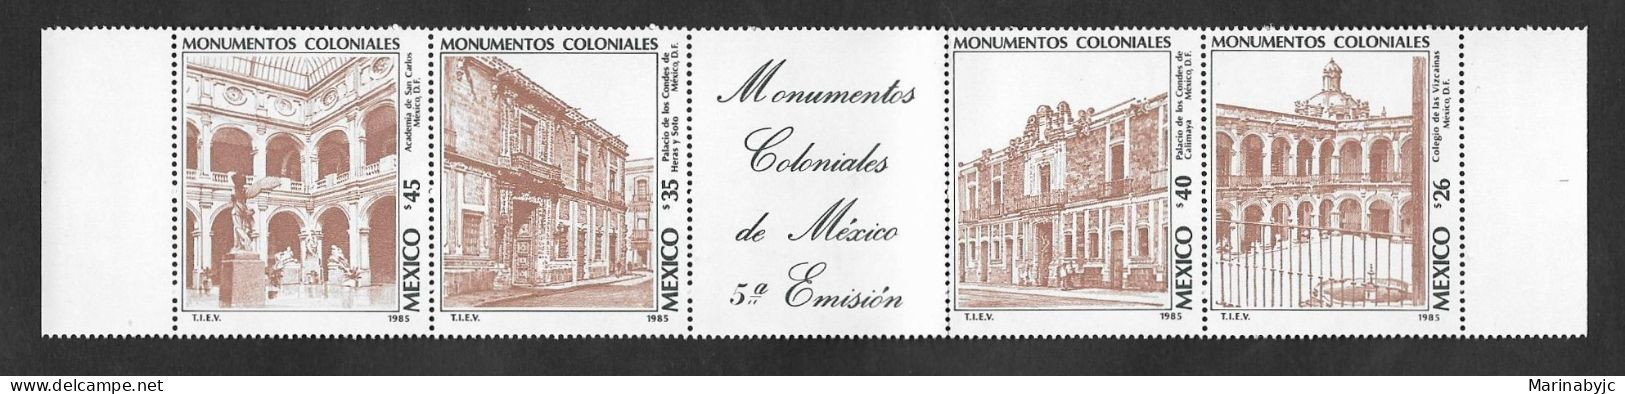 SE)1985 MEXICO, COLONIAL MONUMENTS, ACADEMY, PALACES, SCHOOLS SCT1430A, STRIP OF 4 STAMPS, MNH - Mexico